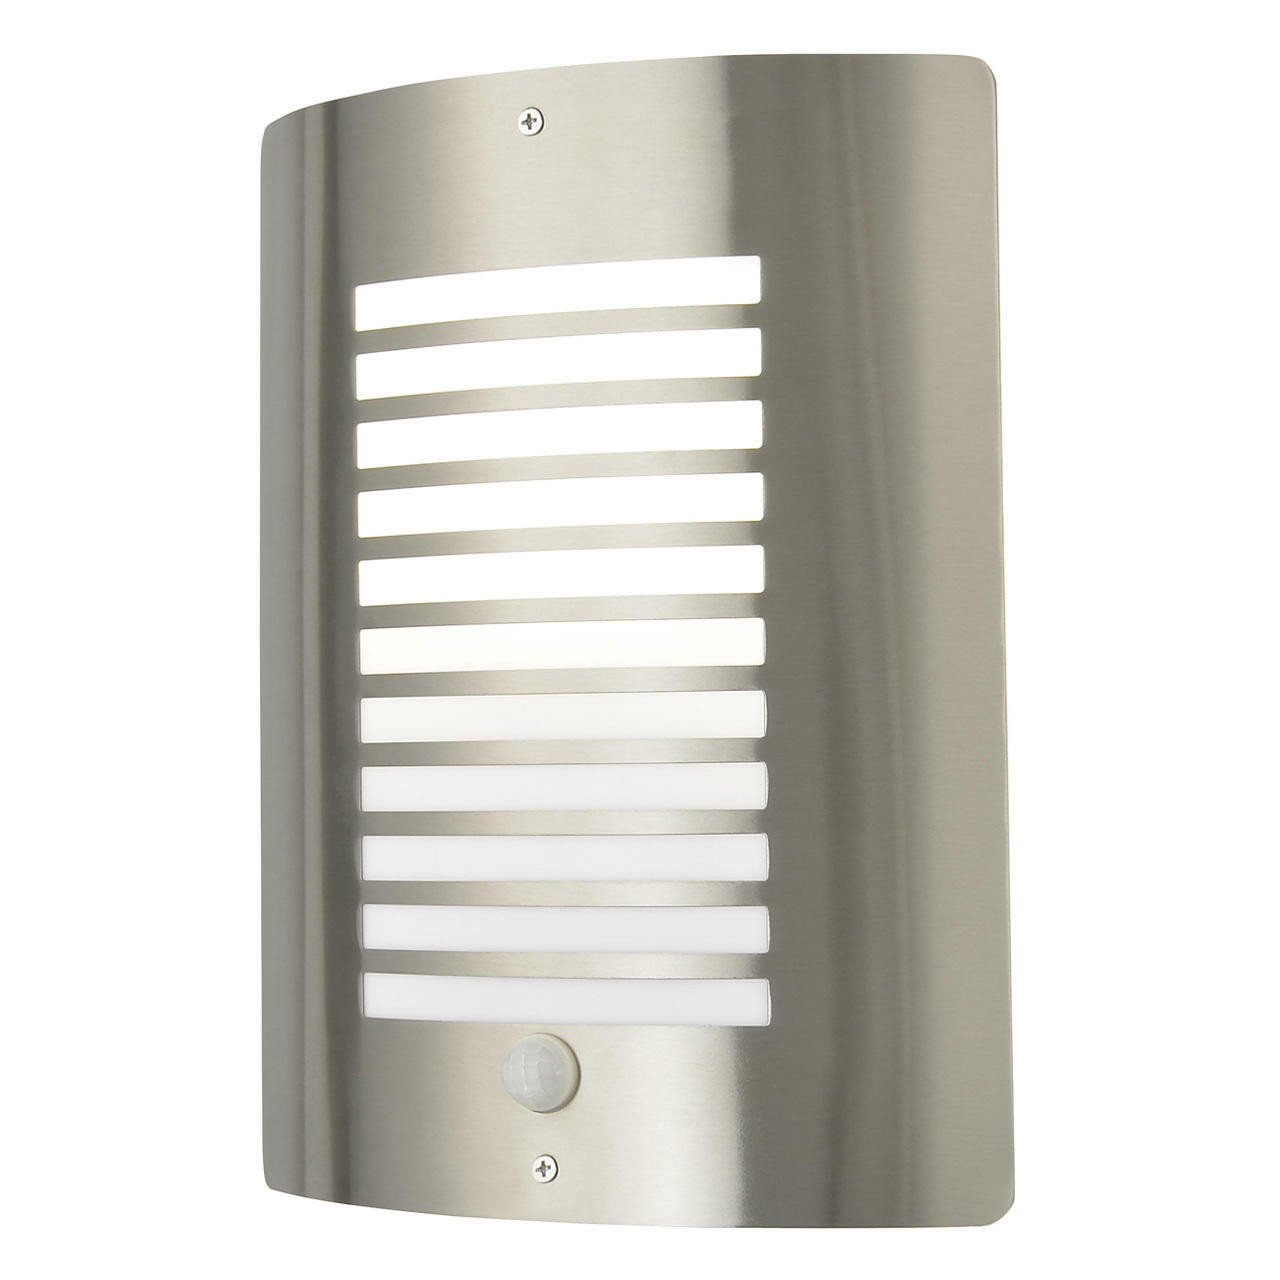 Zink SIGMA Outdoor Slatted Wall Lantern with PIR Stainless Steel - ZN-28708-SST